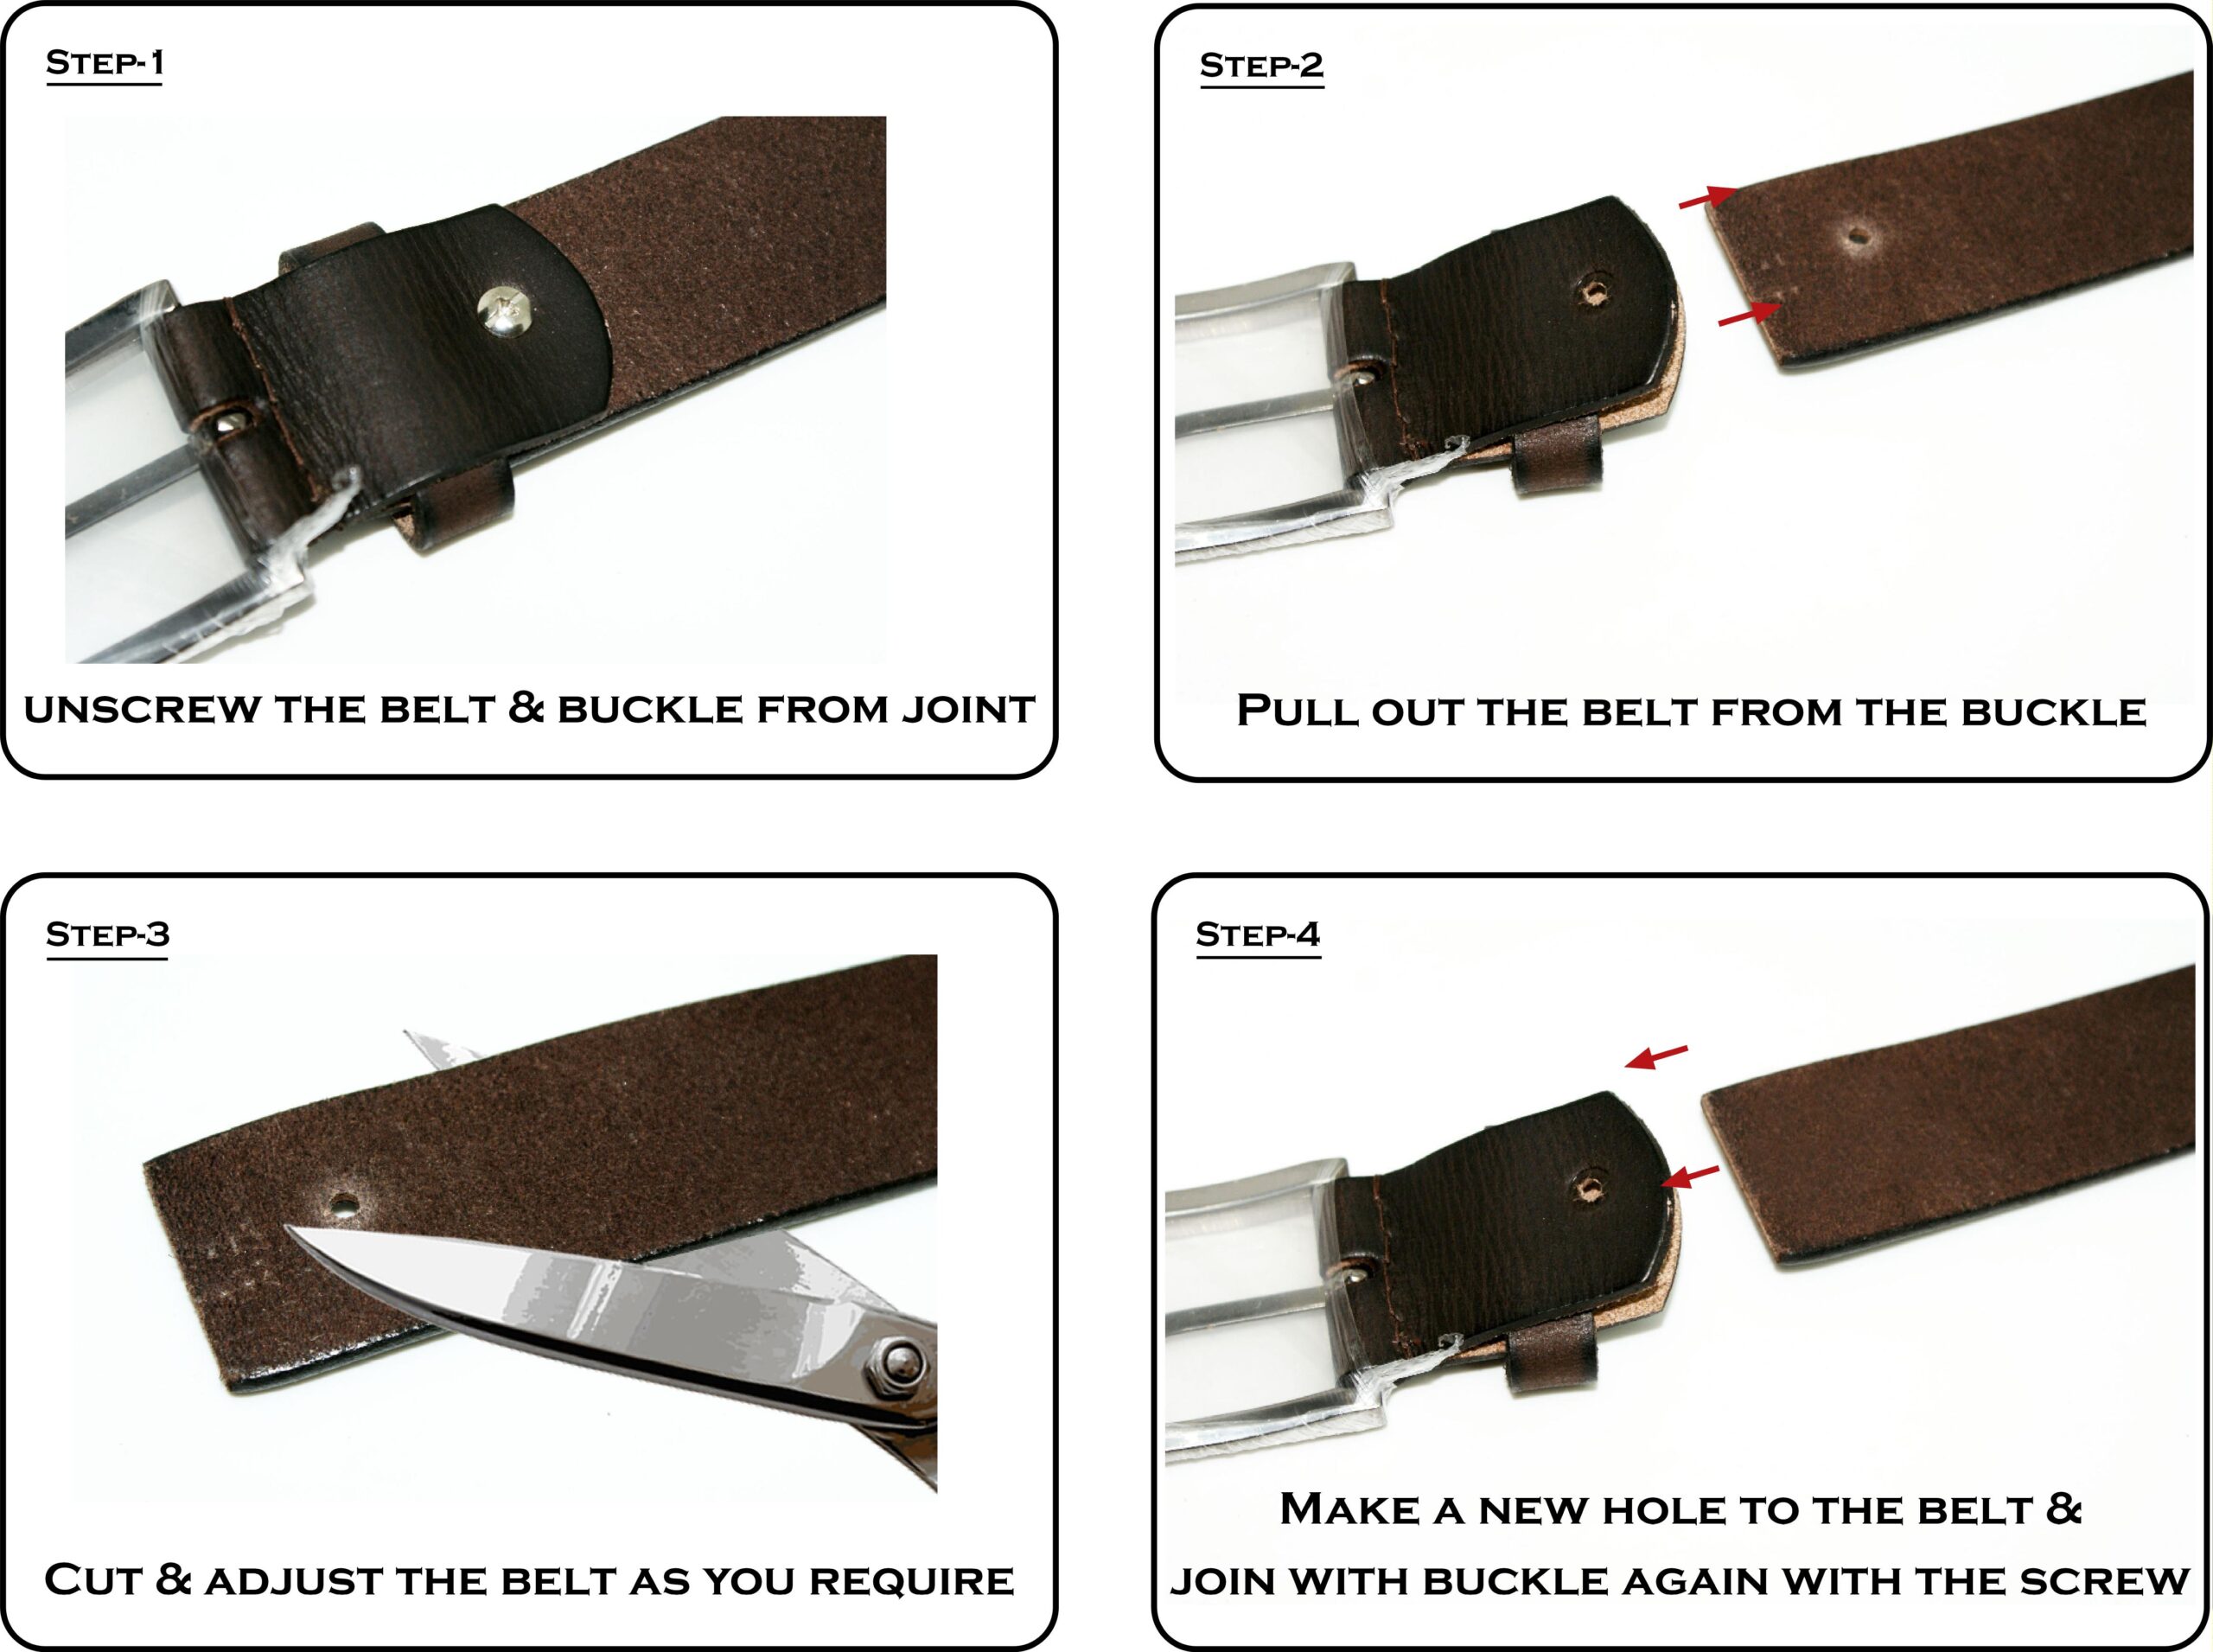 How To Make A New Hole In A Belt | sites.unimi.it